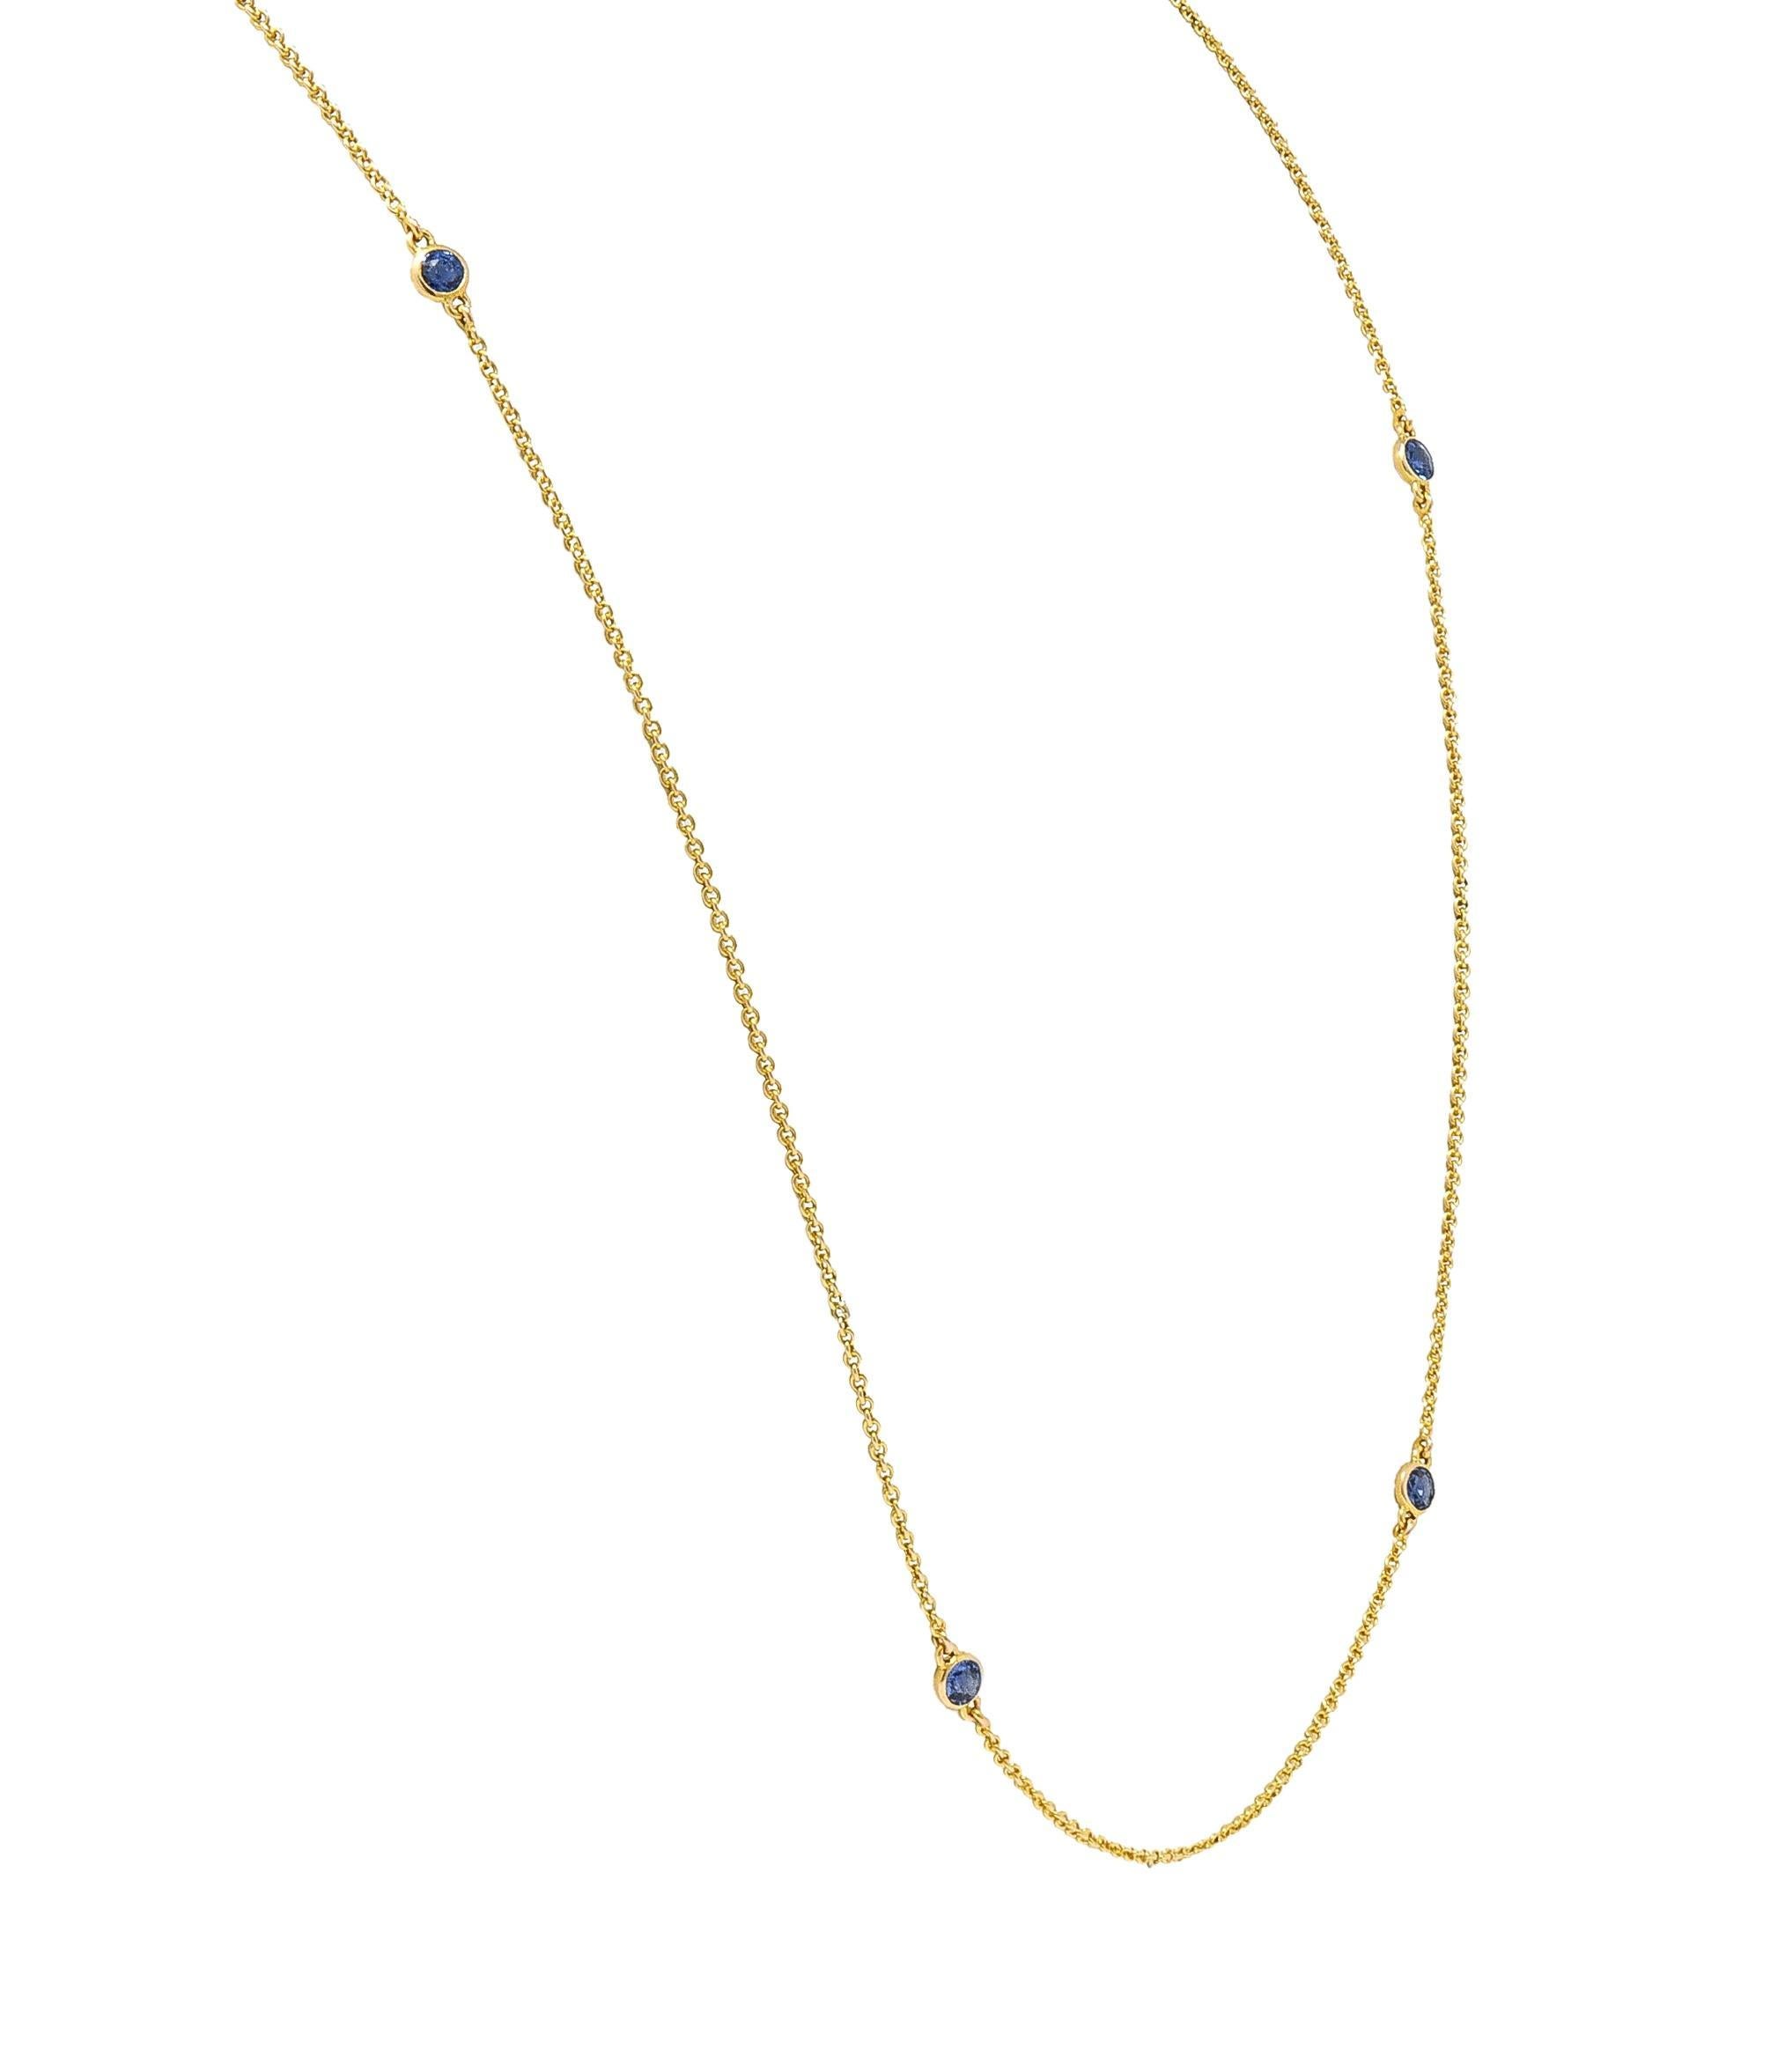 Victorian 2.10 CTW Sapphire 14 Karat Yellow Gold Antique Station Chain Necklace For Sale 1